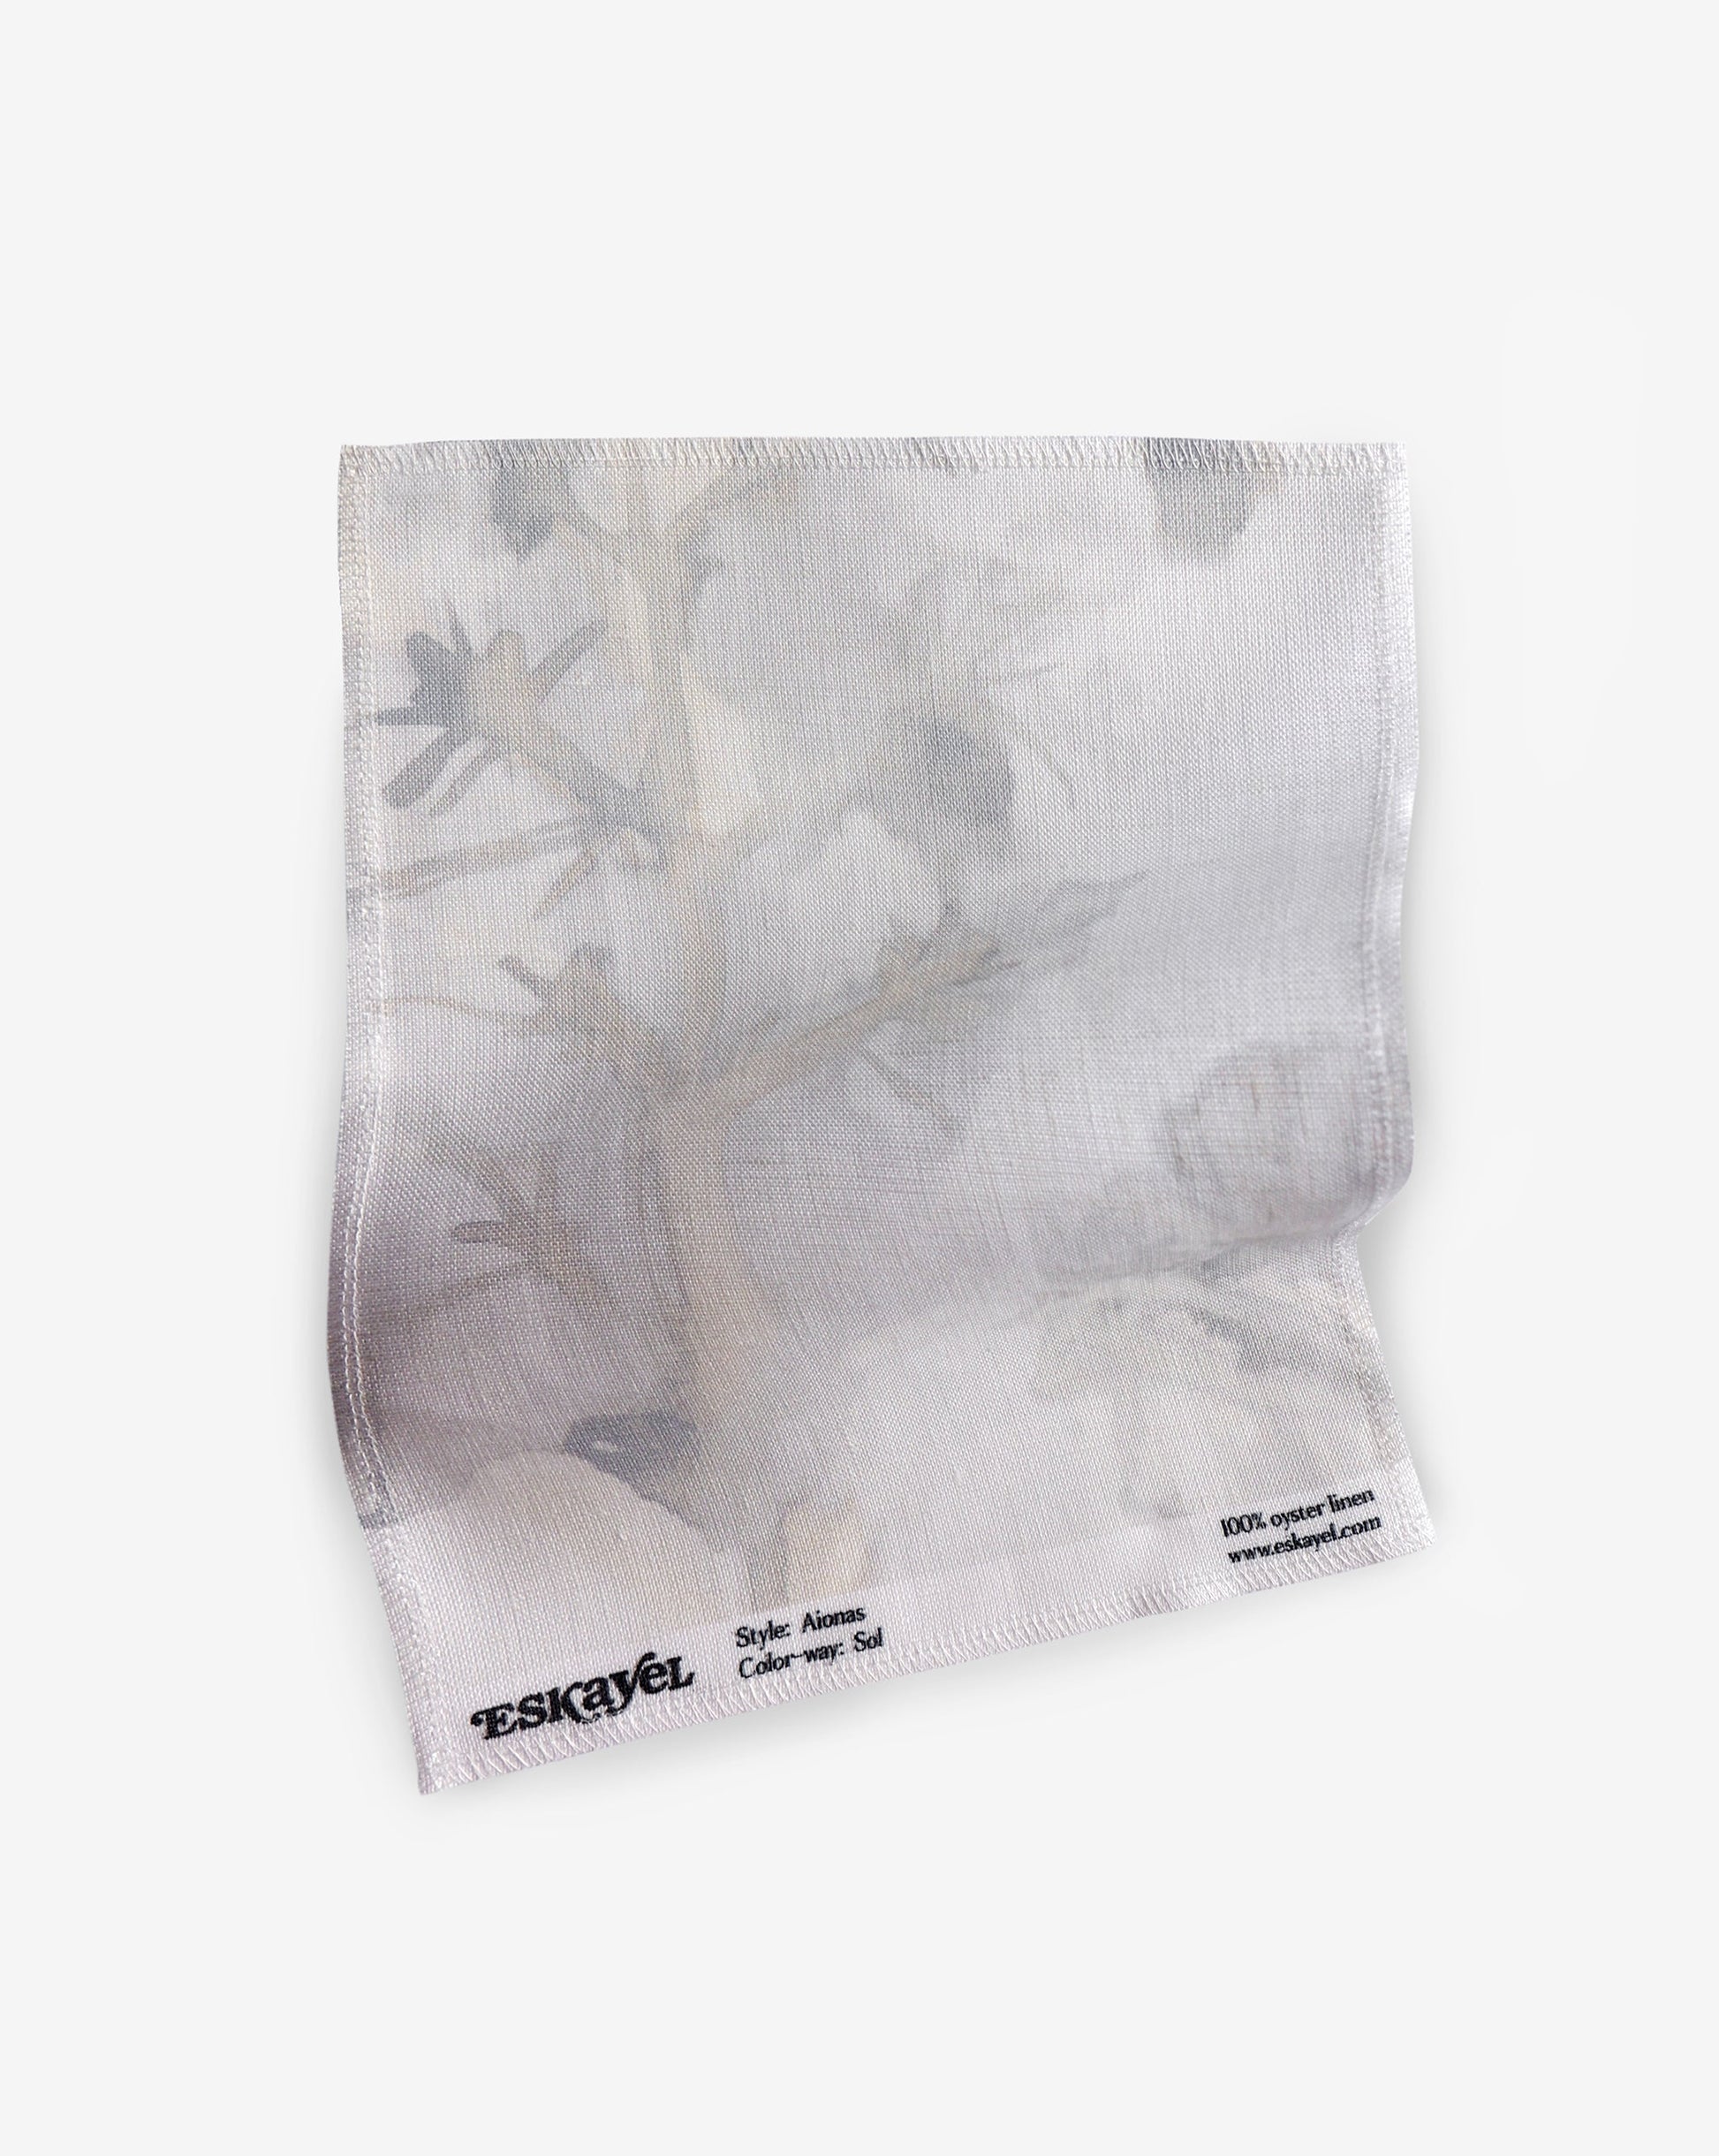 Order a Aionas Fabric Sample||Sol handkerchief with flowers on it.